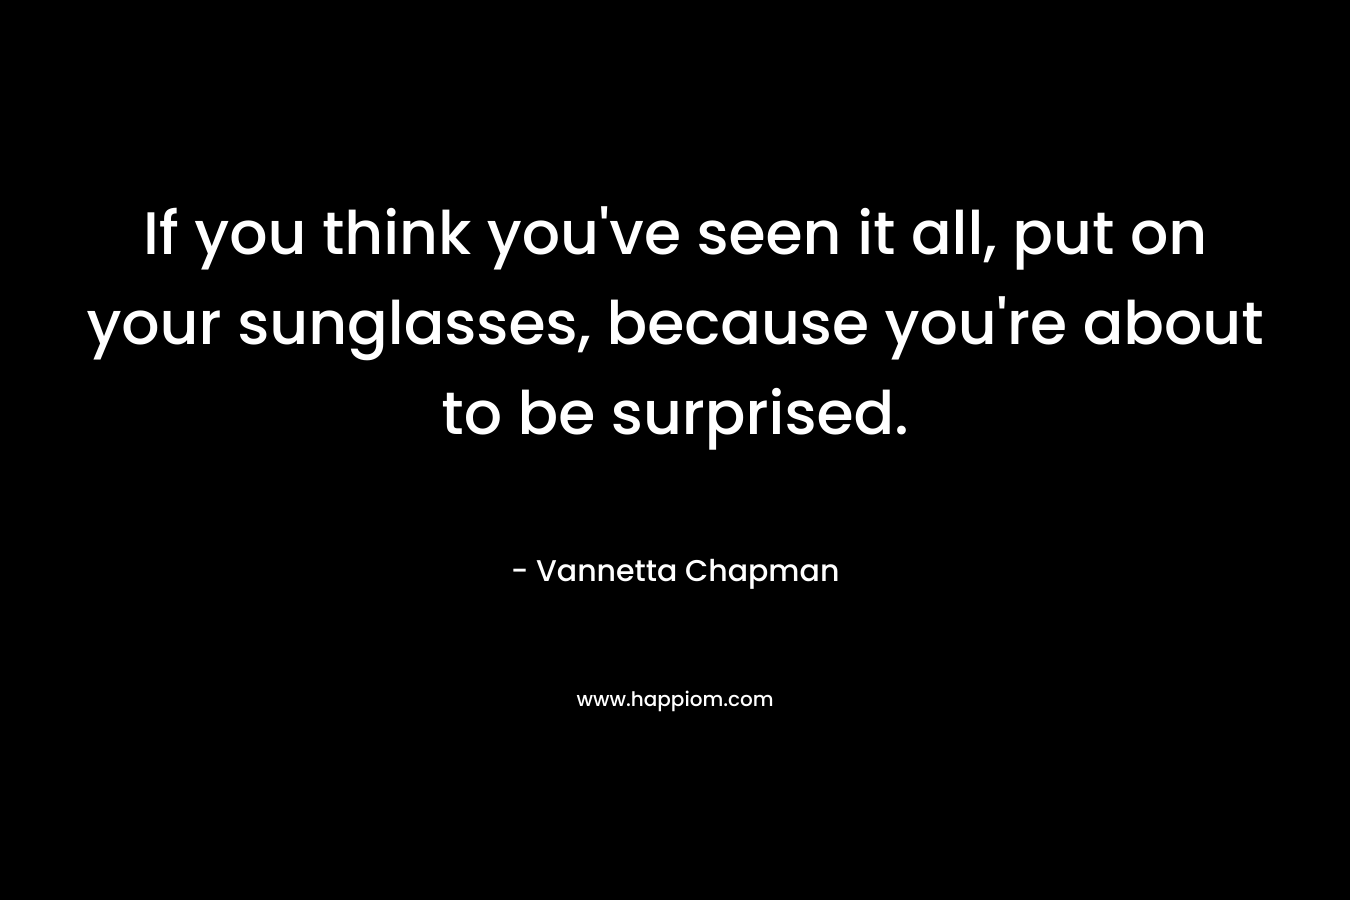 If you think you’ve seen it all, put on your sunglasses, because you’re about to be surprised. – Vannetta Chapman